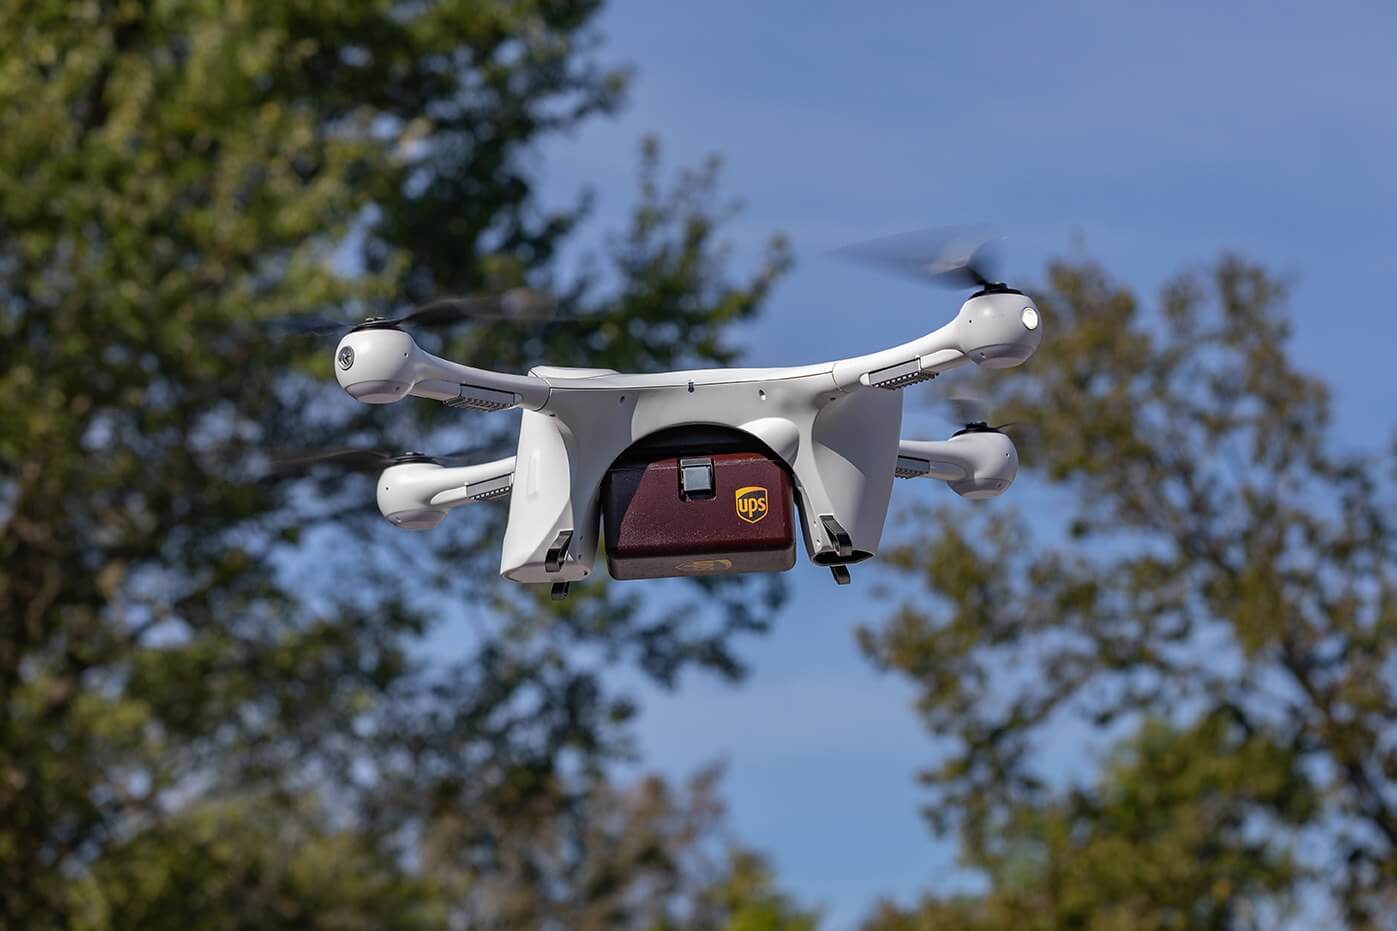 UPS has gained FAA approval to operate a 'drone airline'